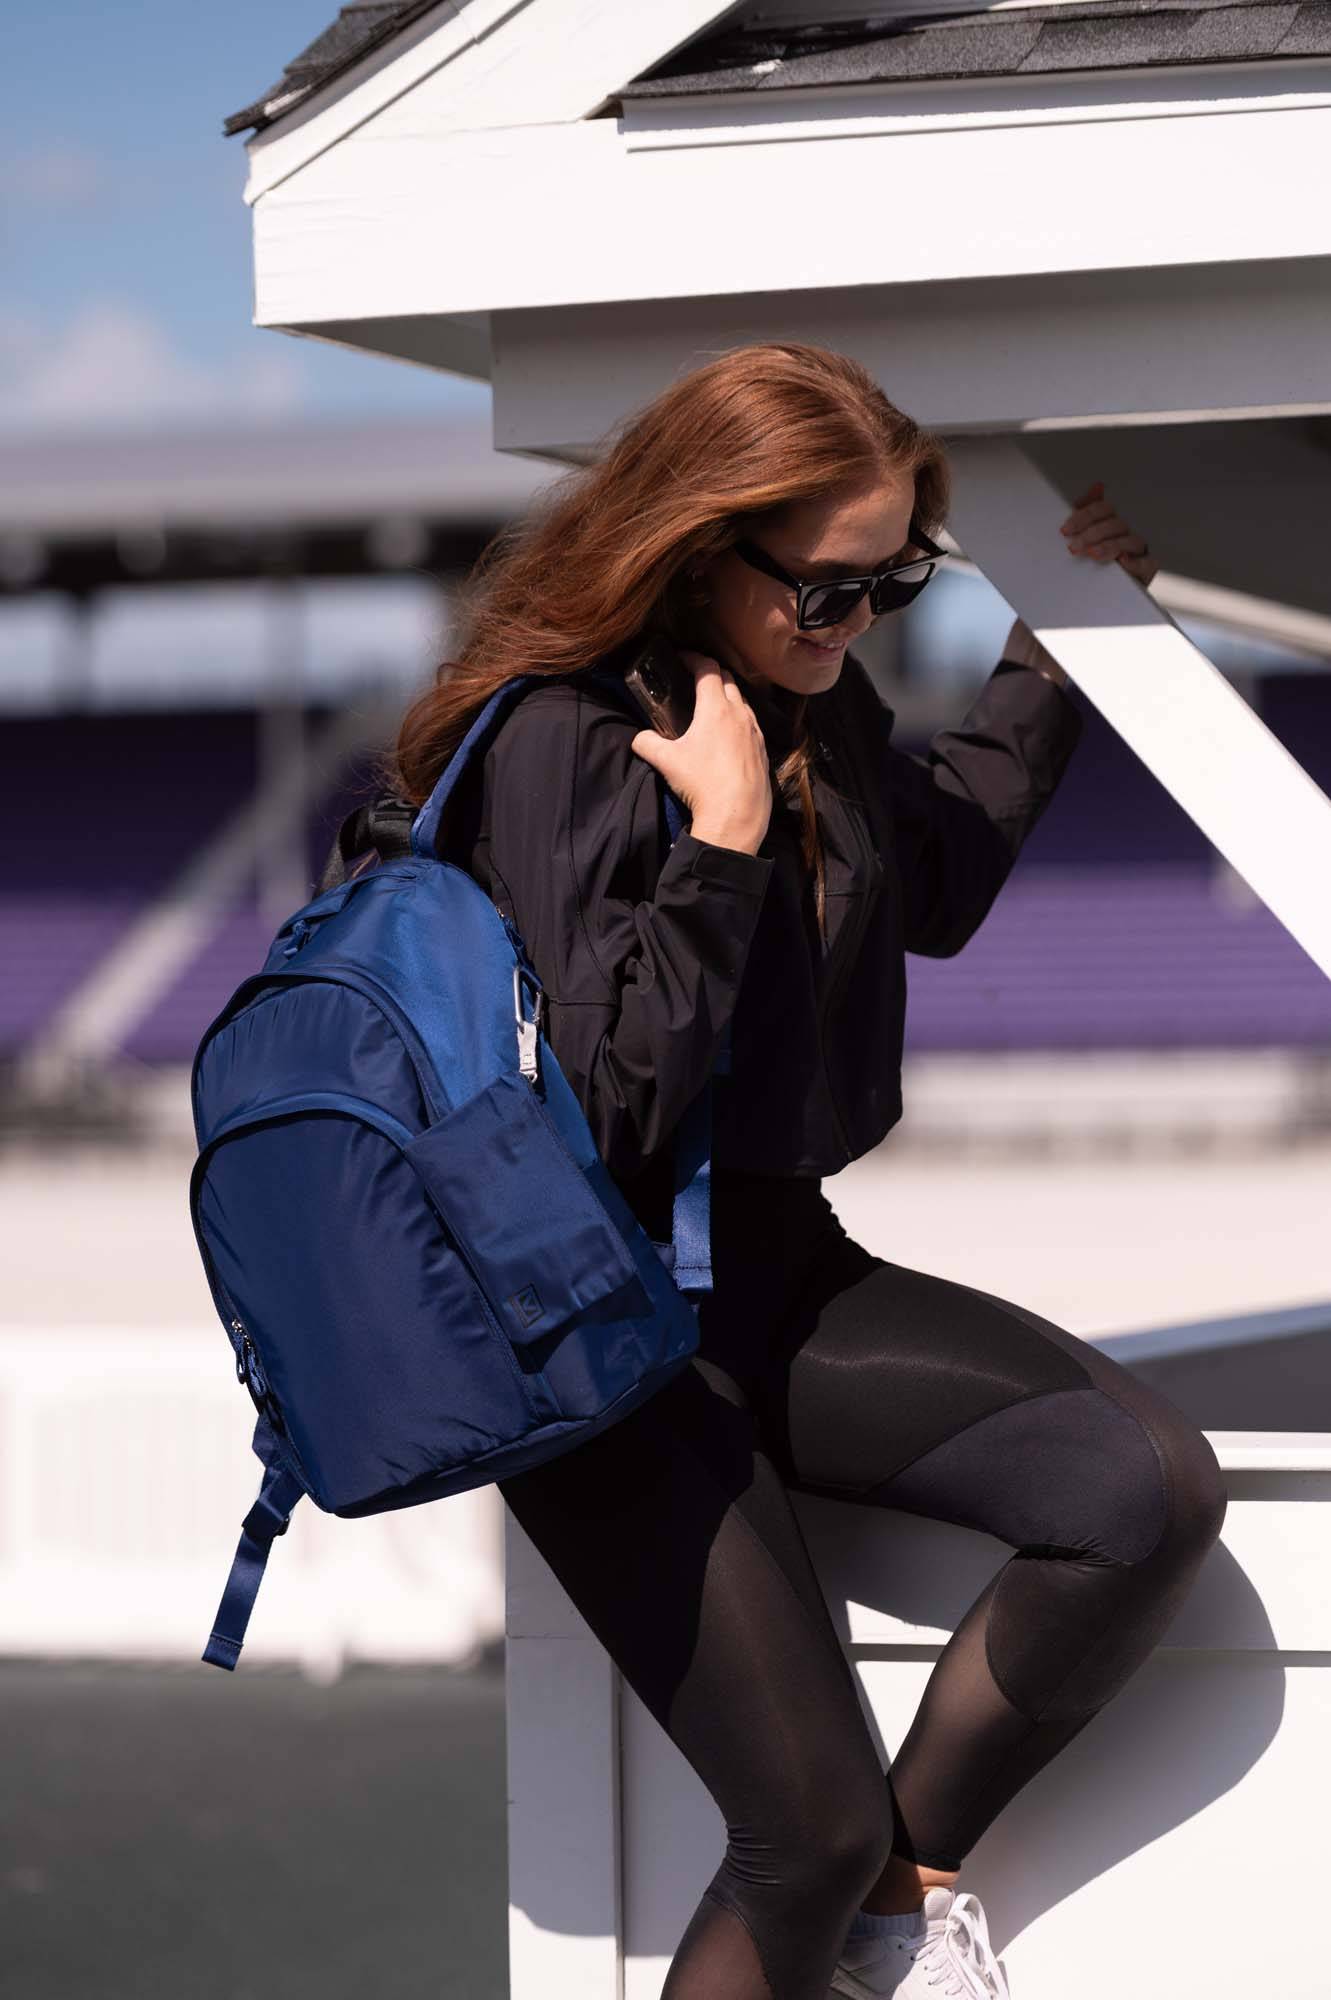 The new “it” equestrian bag: the Veltri Sport backpack